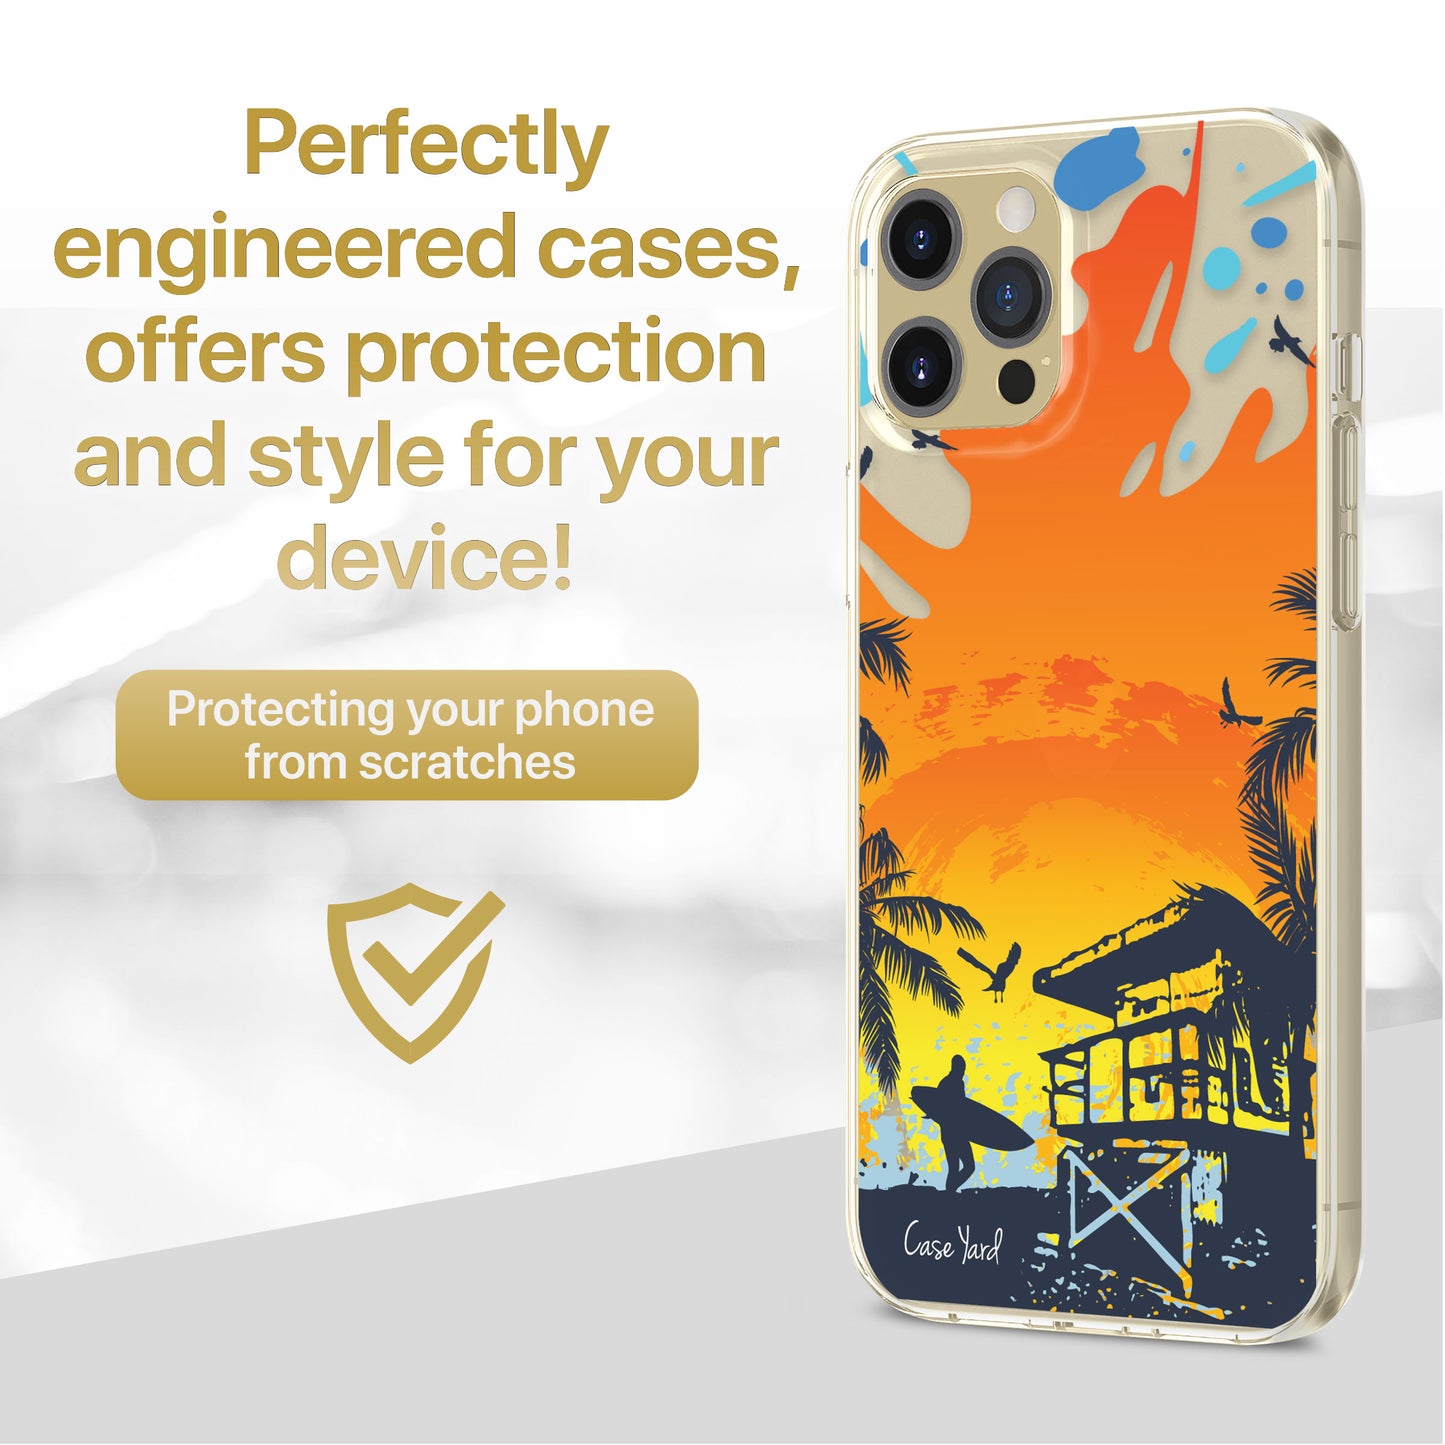 TPU Clear case with (Lifeguard) Design for iPhone & Samsung Phones